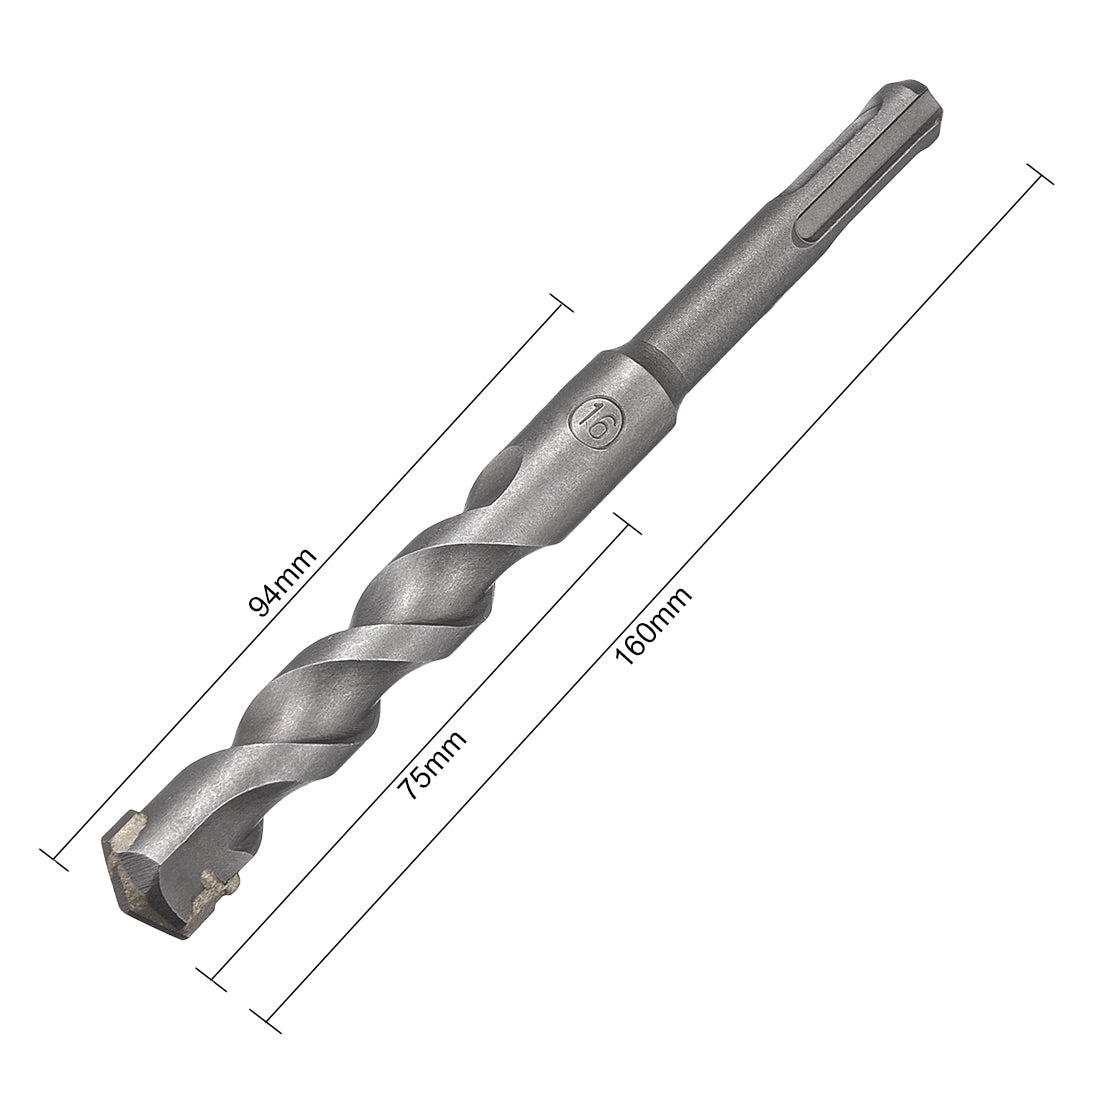 uxcell Uxcell Masonry Drill Bit 16mmx160mm 9mm Round Shank for Impact Drill